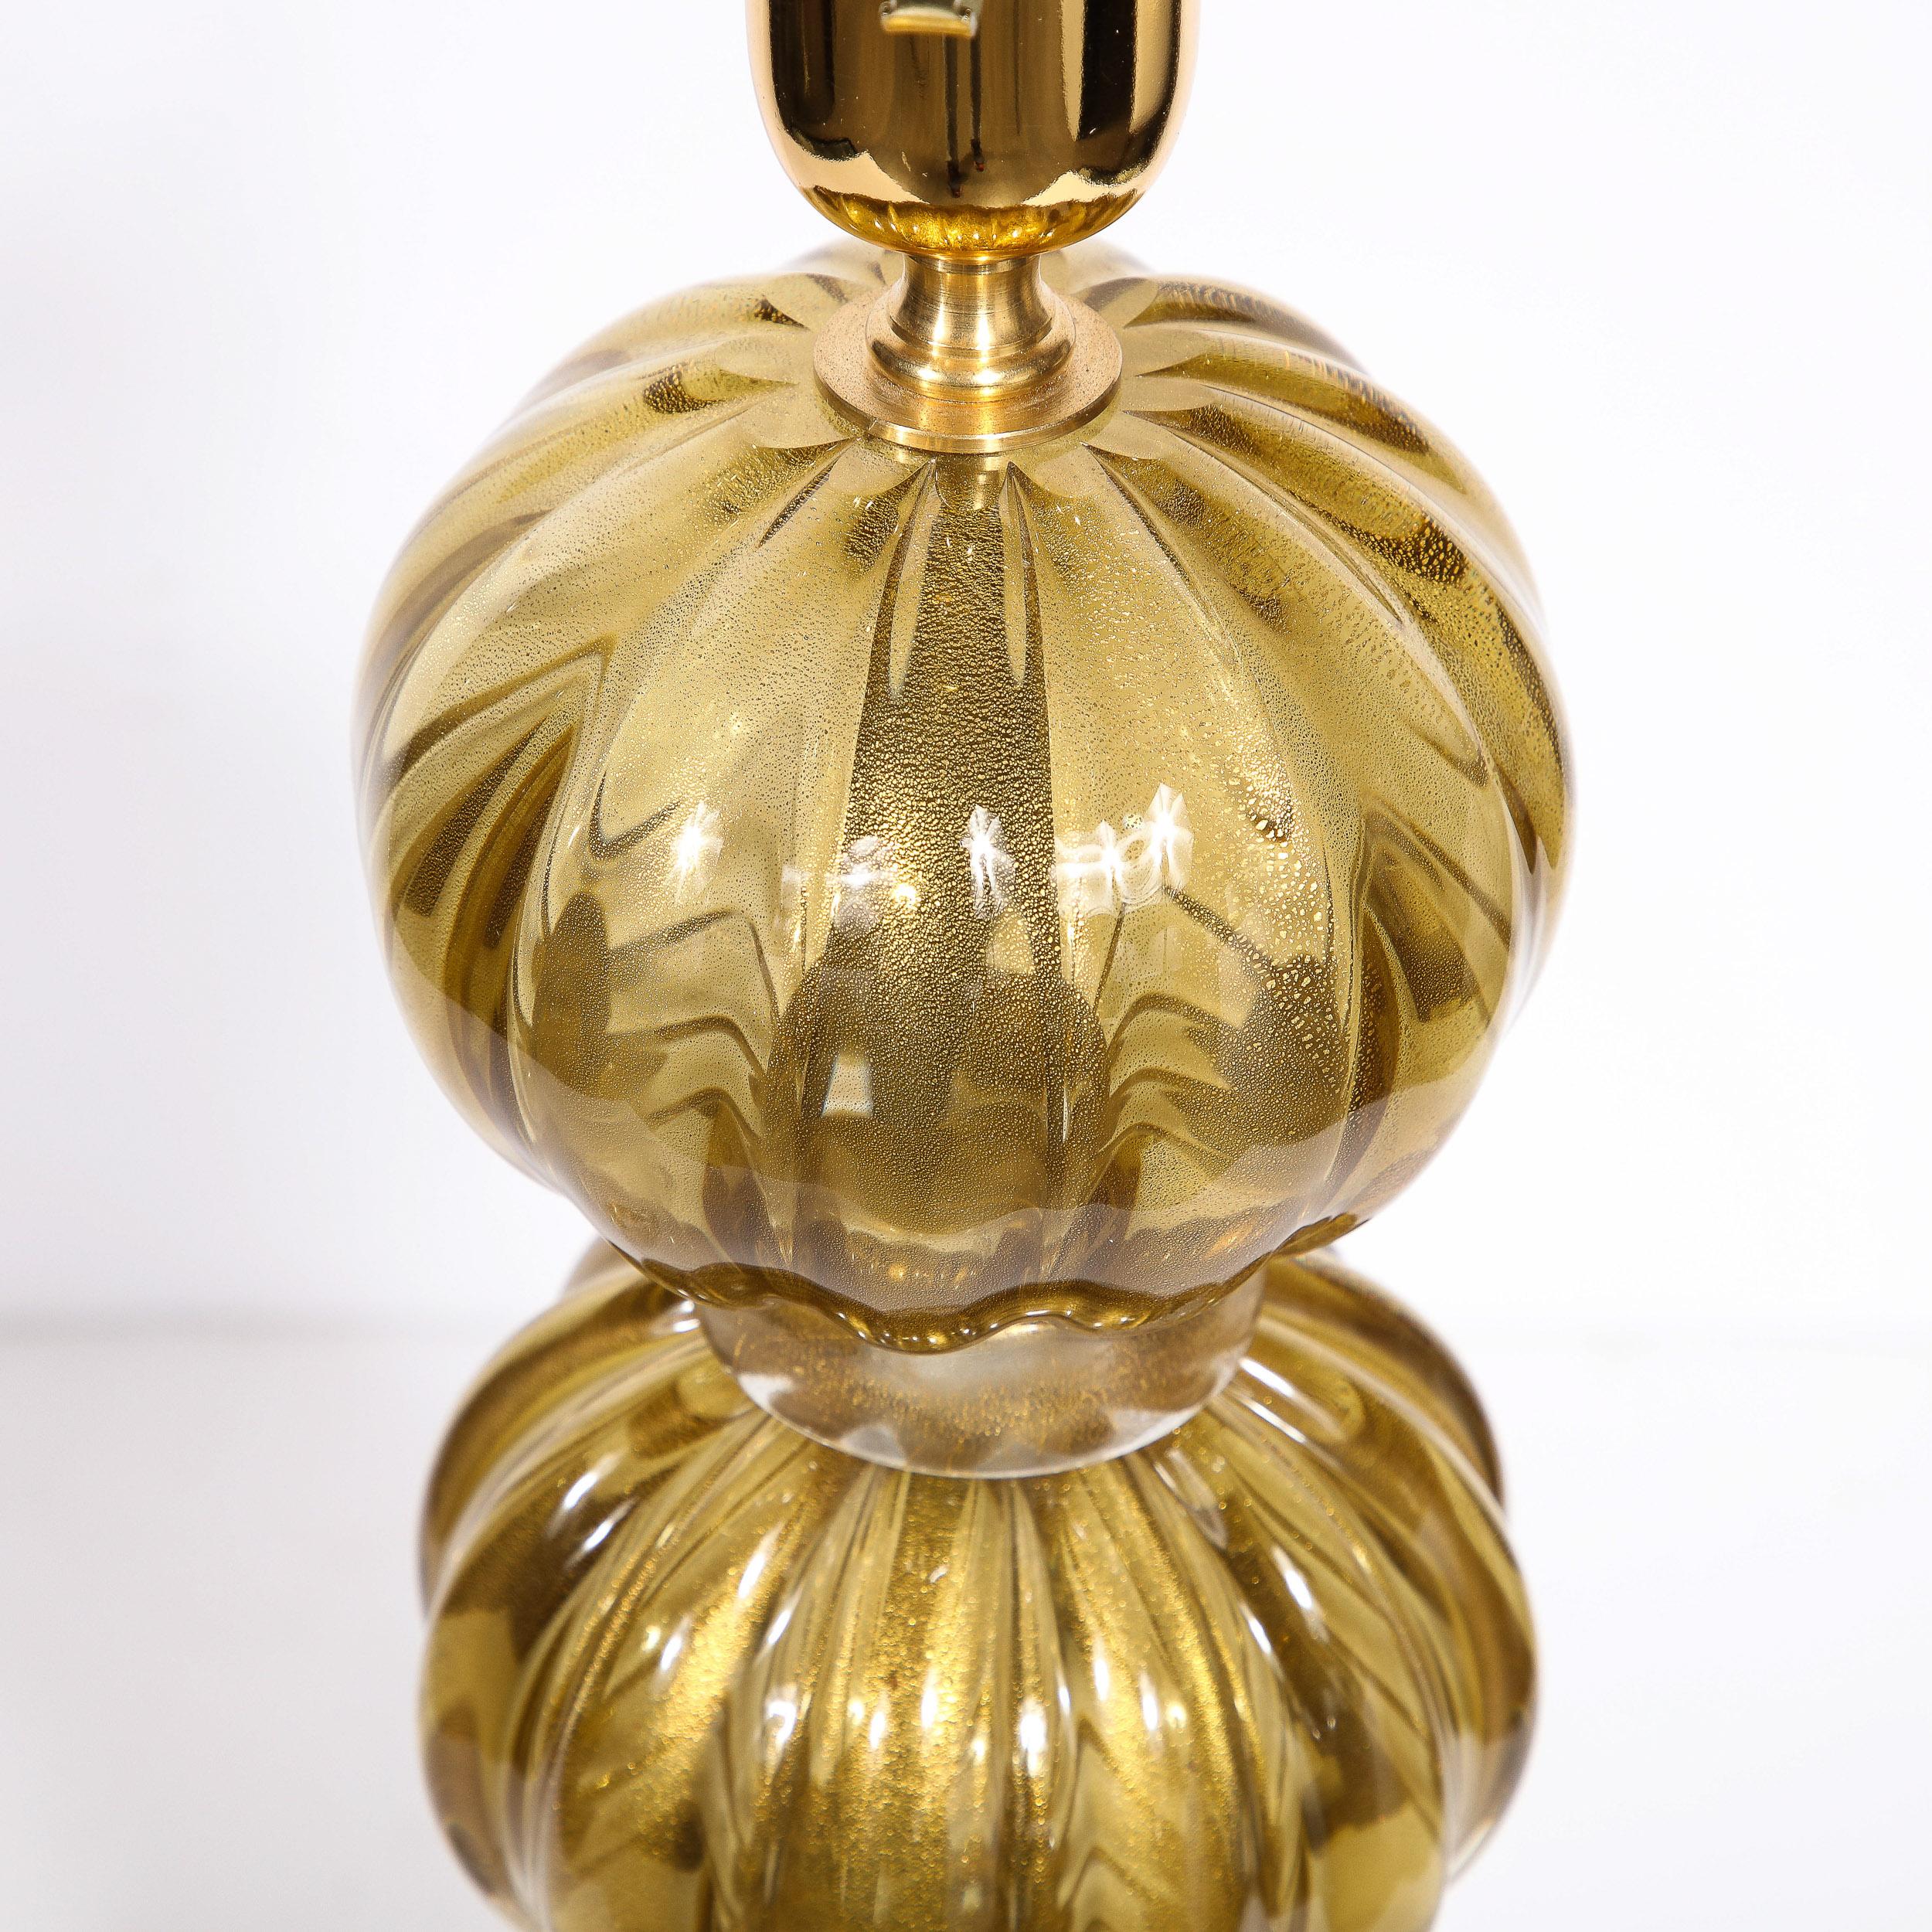 Modernist Hand-Blown Murano Glass Table Lamps in Smoked Gold W/ 24 Karat Flecks For Sale 7